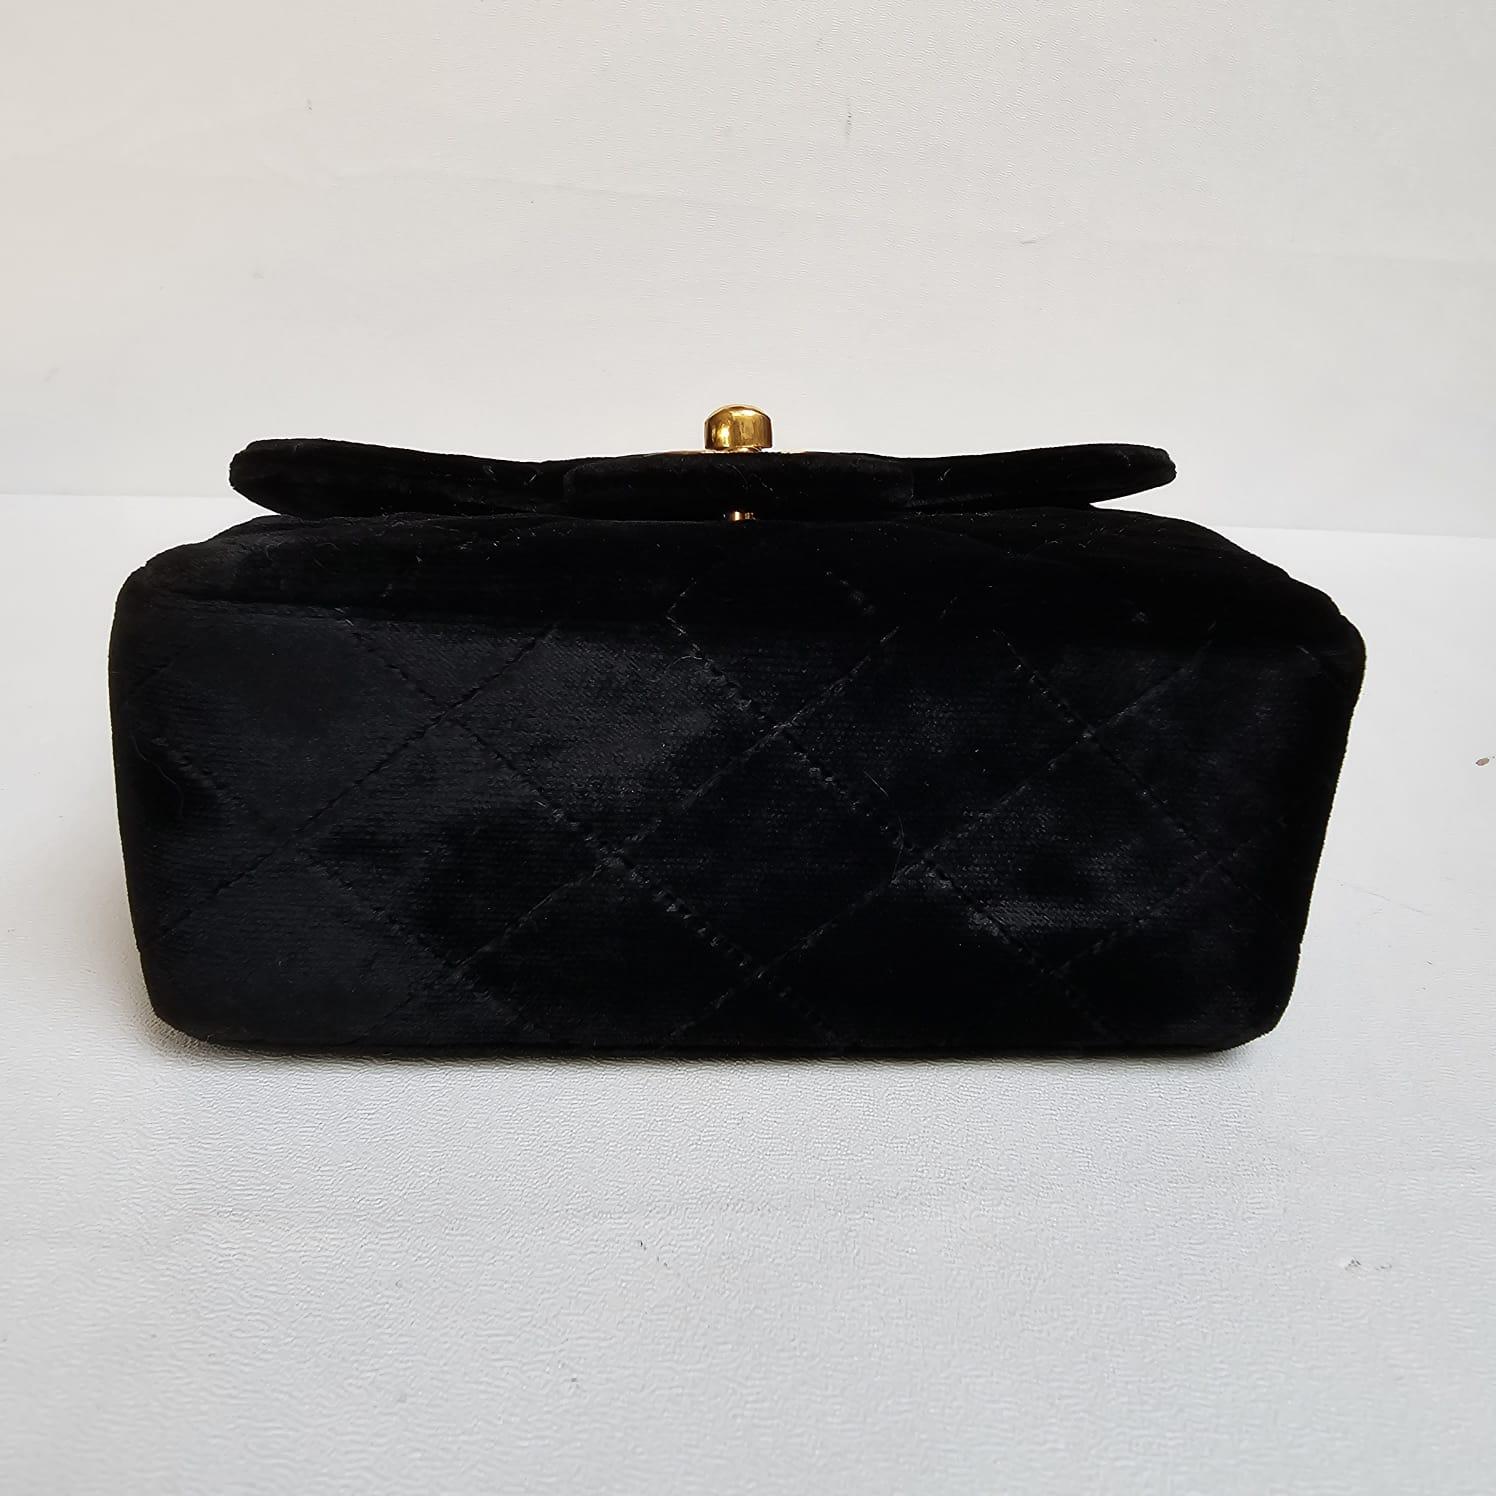 Very rare mini kelly black velvet with gold hardware. Very good condition overall. This is not part of the mini kelly from the twin bag (that one does not come with its own holo sticker. Comes with holo sticker and dust bag.